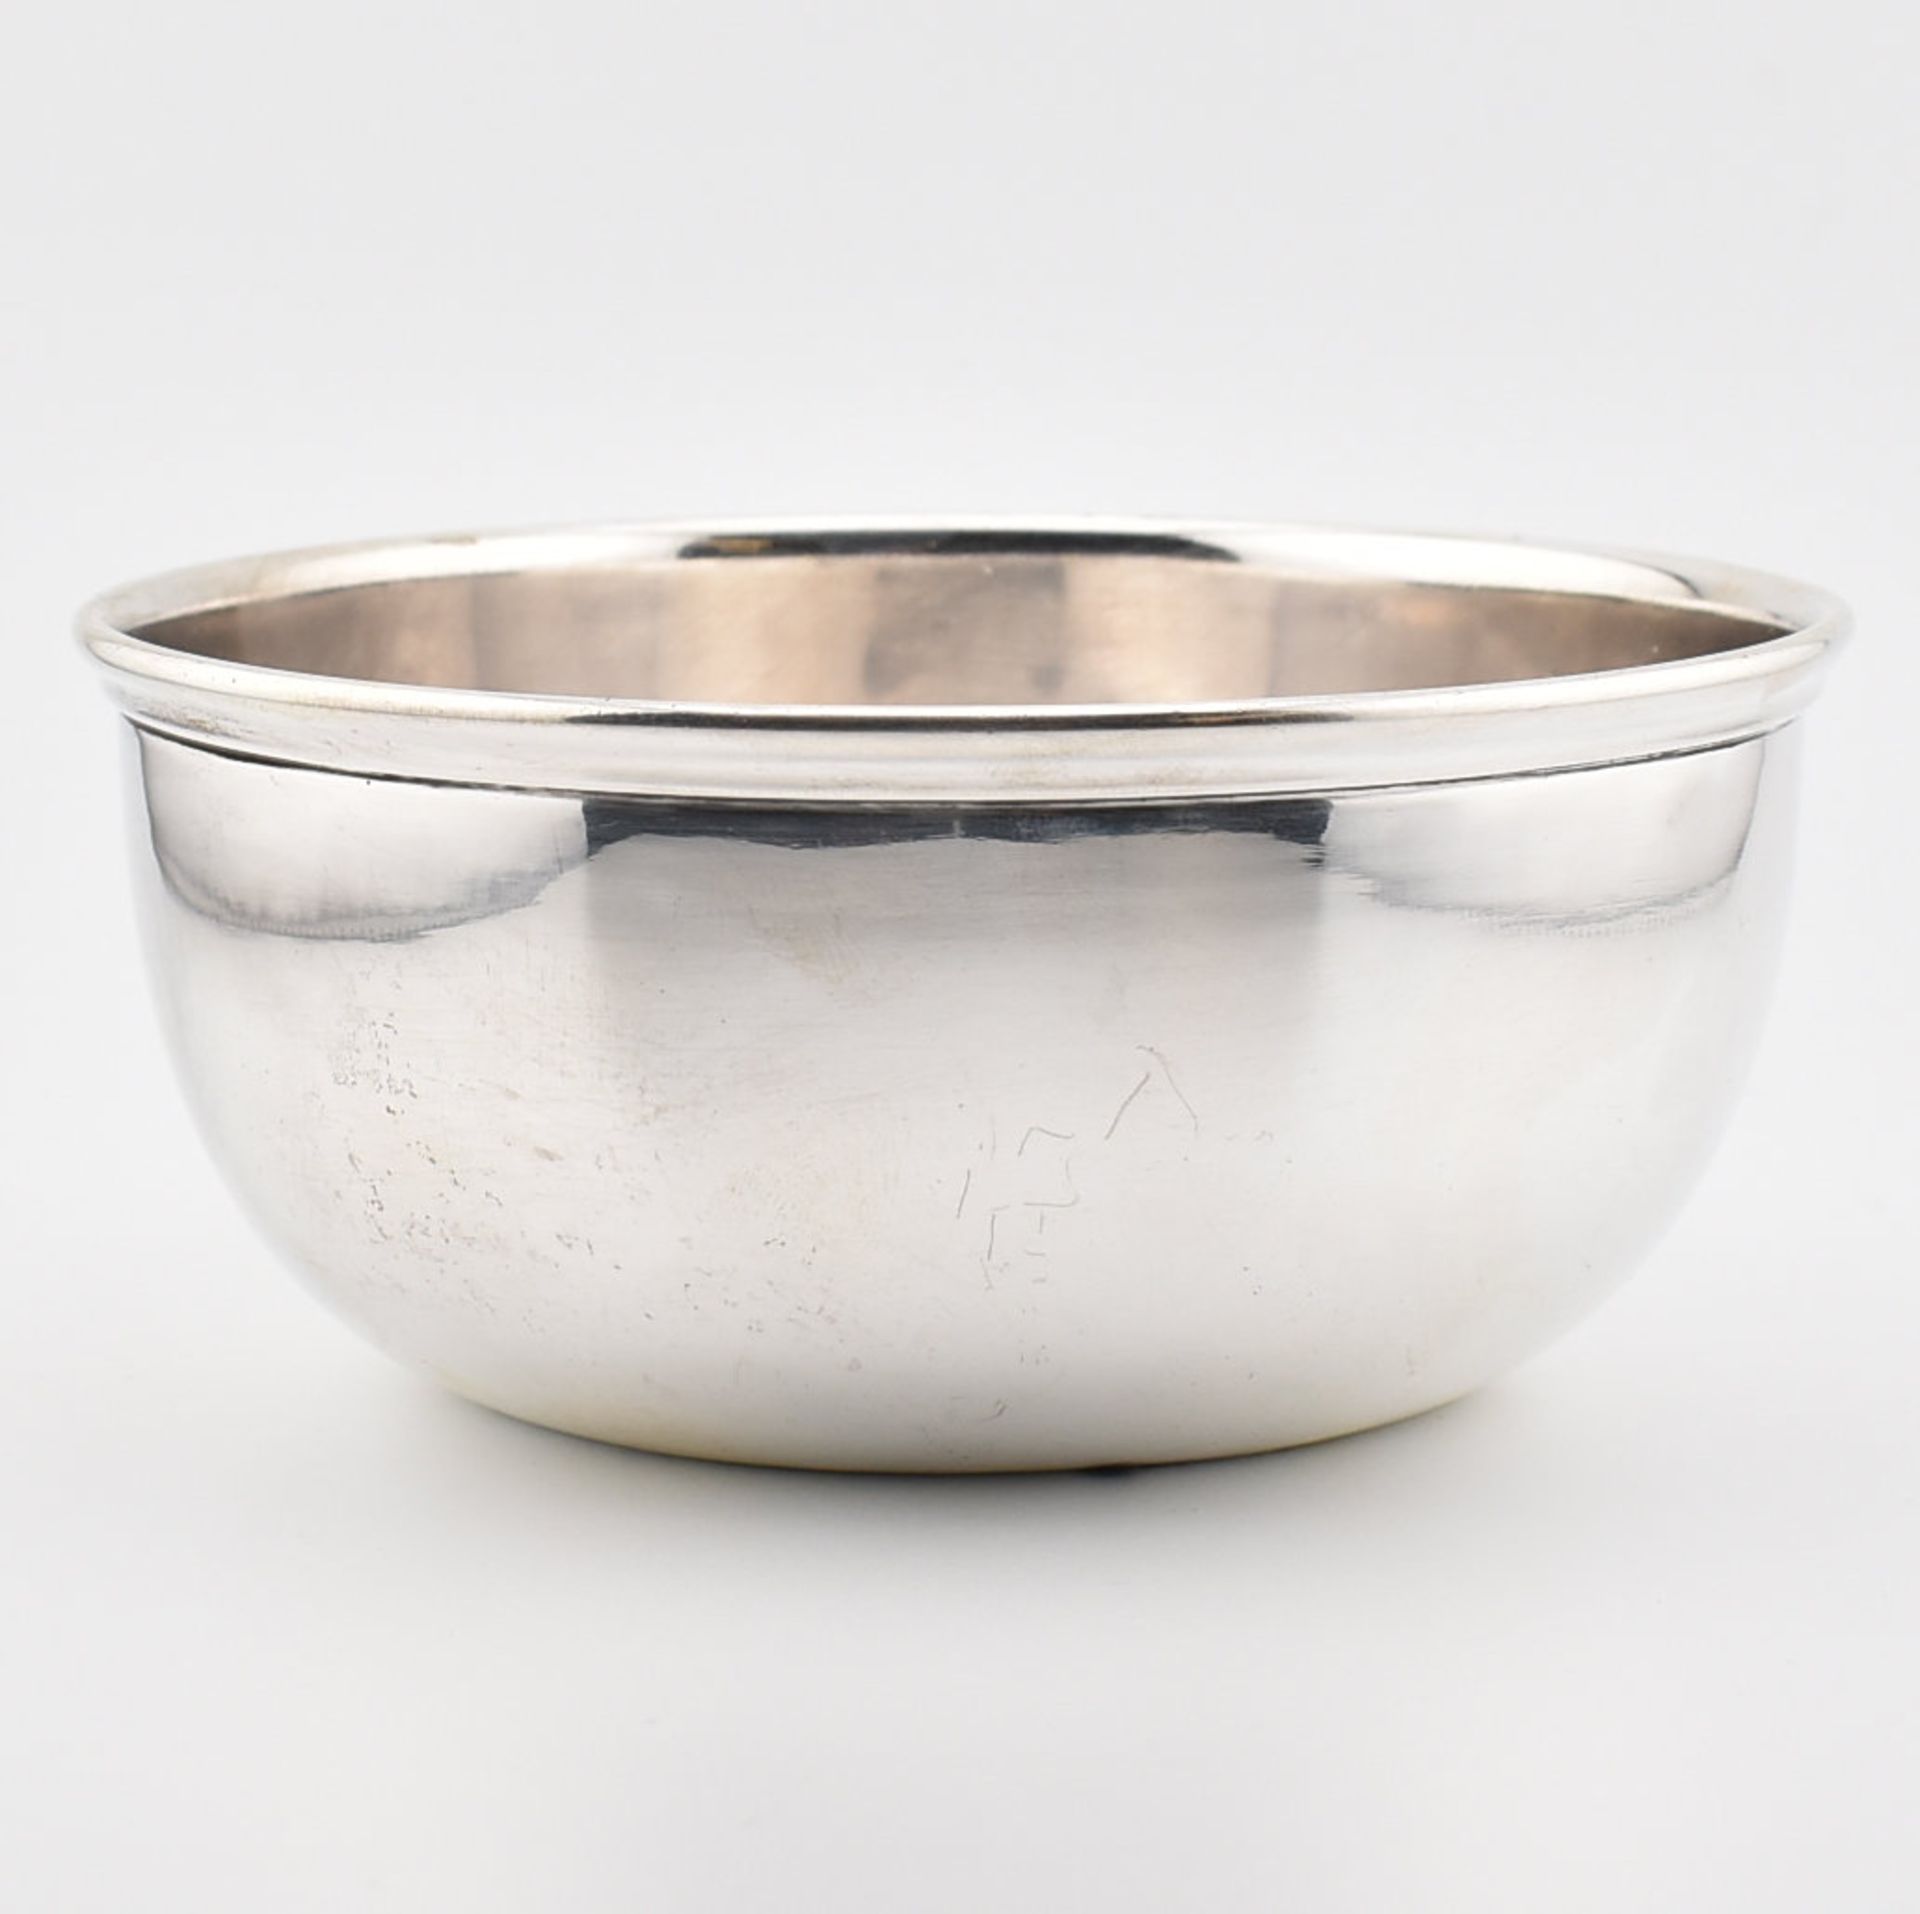 GEORGE V HALLMARKED EARLY 20TH CENTURY SILVER BOWL - Image 5 of 8